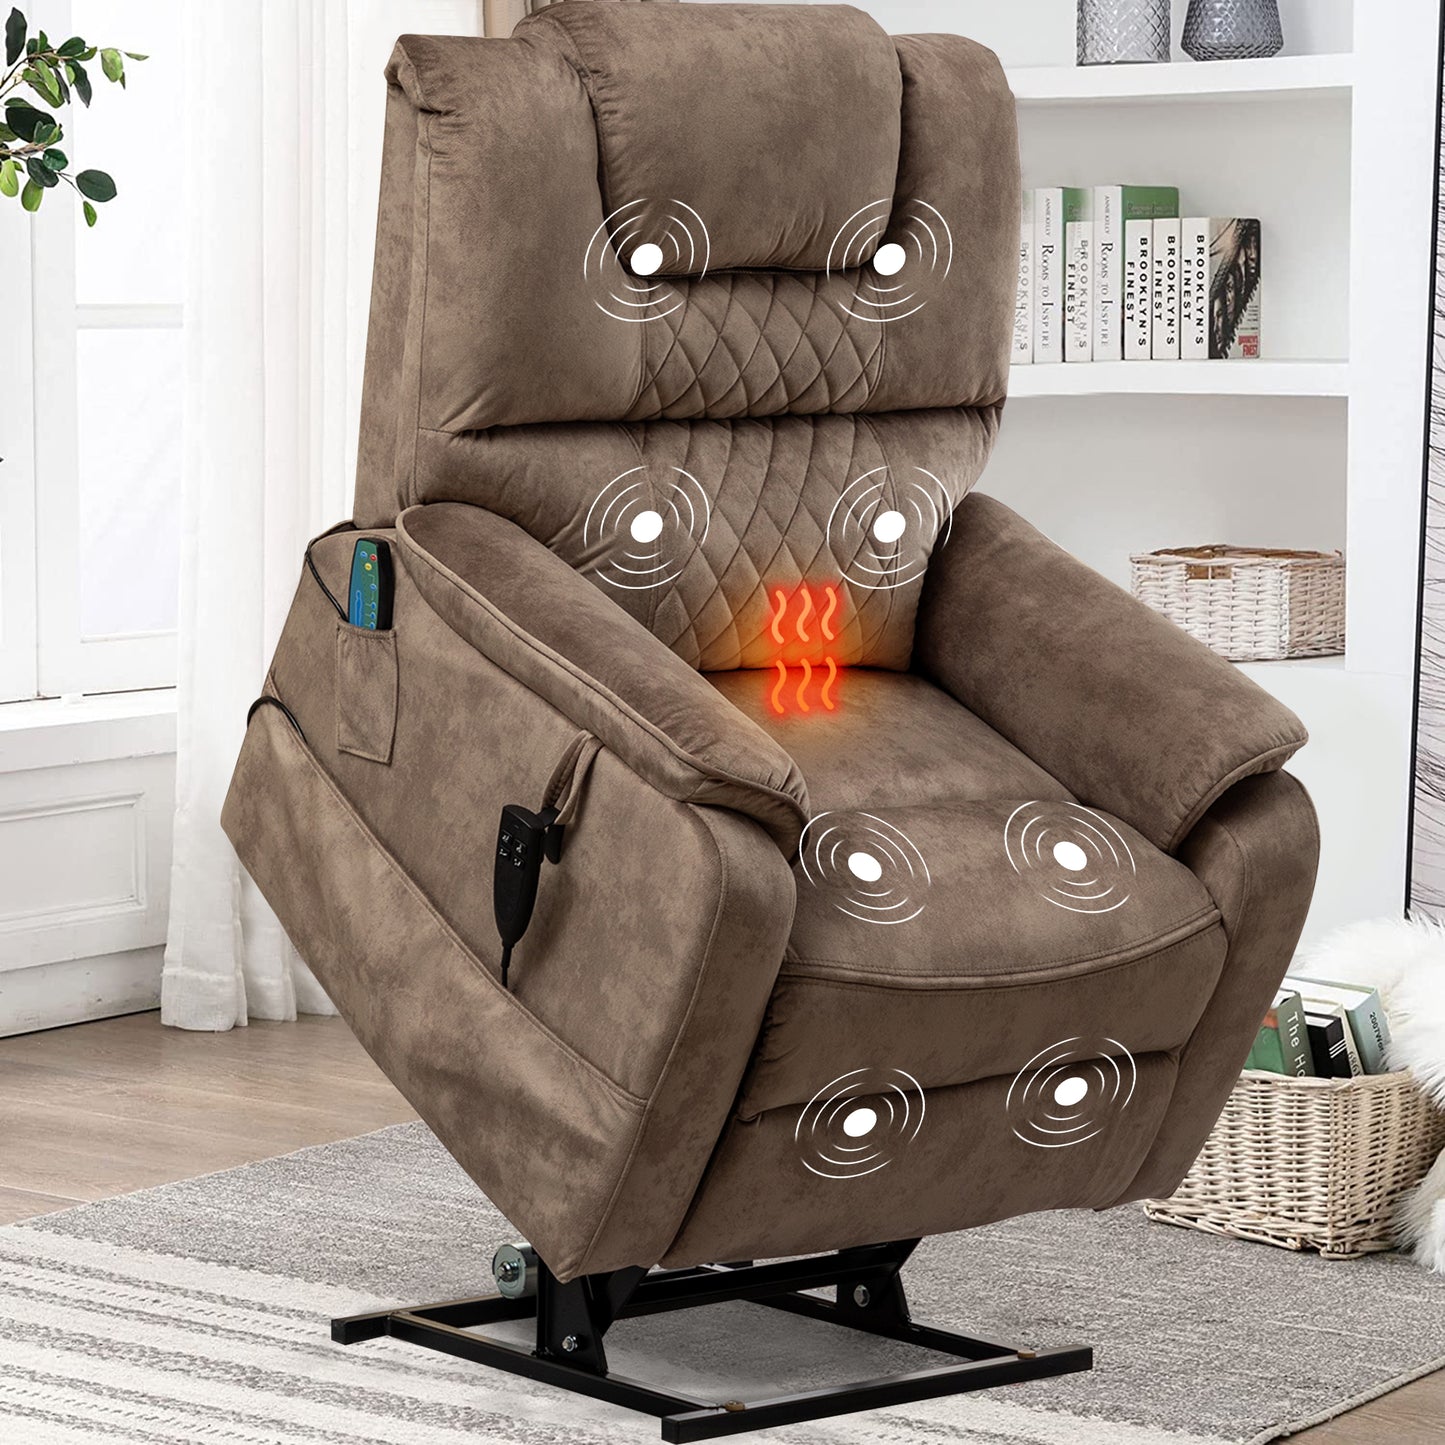 Double Power Recliner Chair Oversized, Electric Recliner Chair with Heat Therapy and Massage, 180 Degrees Lying Flat Recliner for Adults Elderly, Single Leisure Sofa for Living Room, Beige Yellow